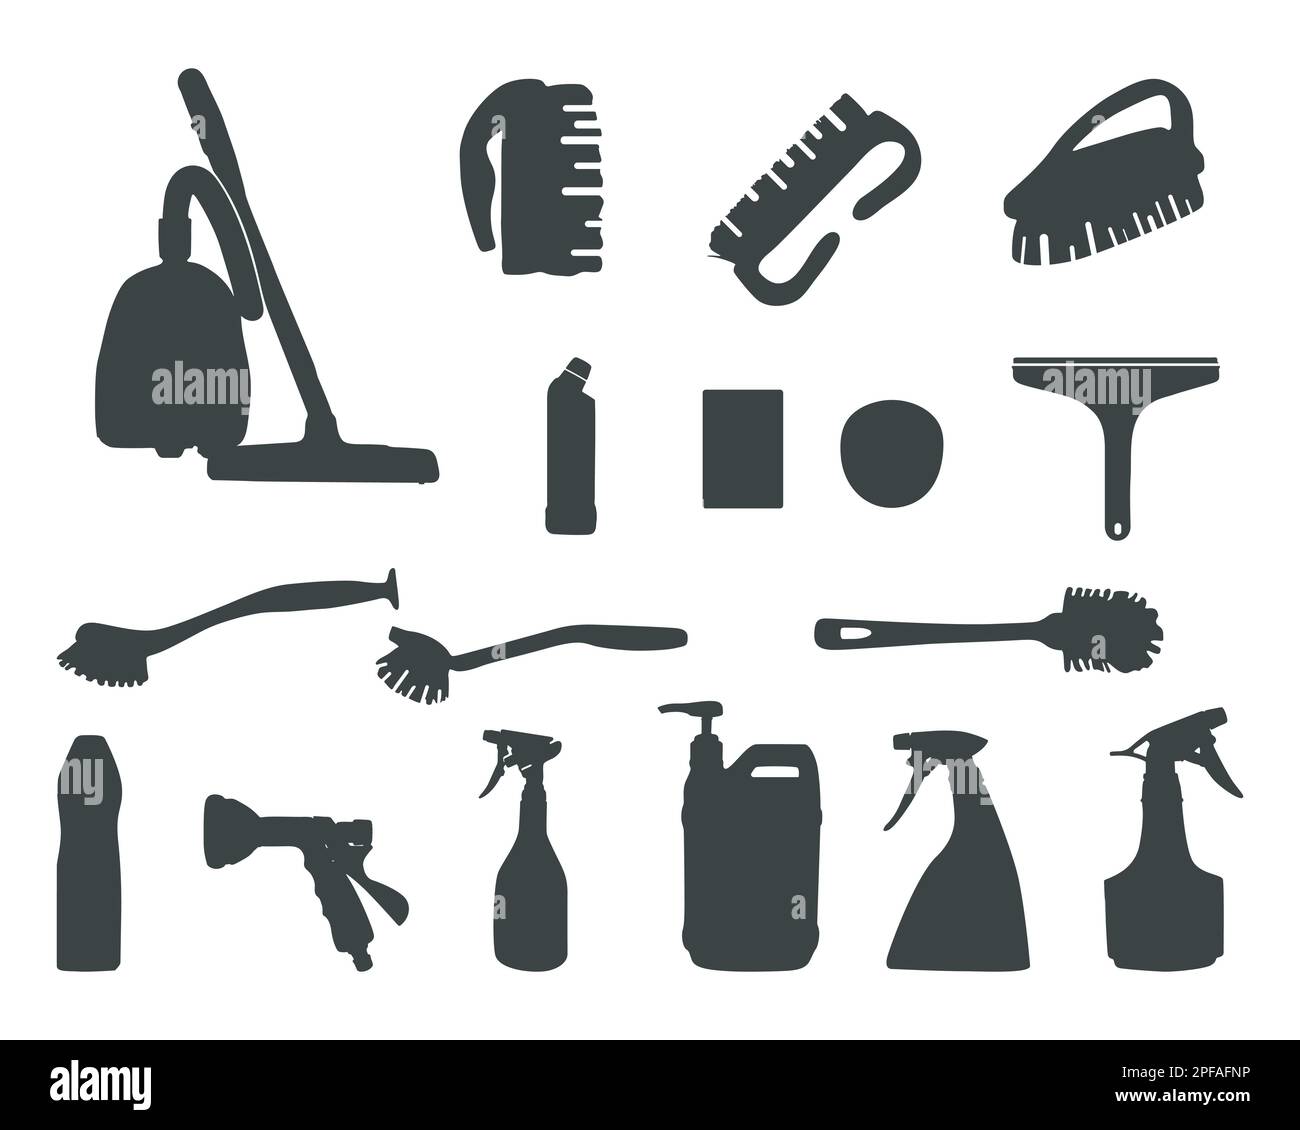 Cleaning tools silhouette, Cleaning tools equipment, Cleaning tools SVG Stock Vector